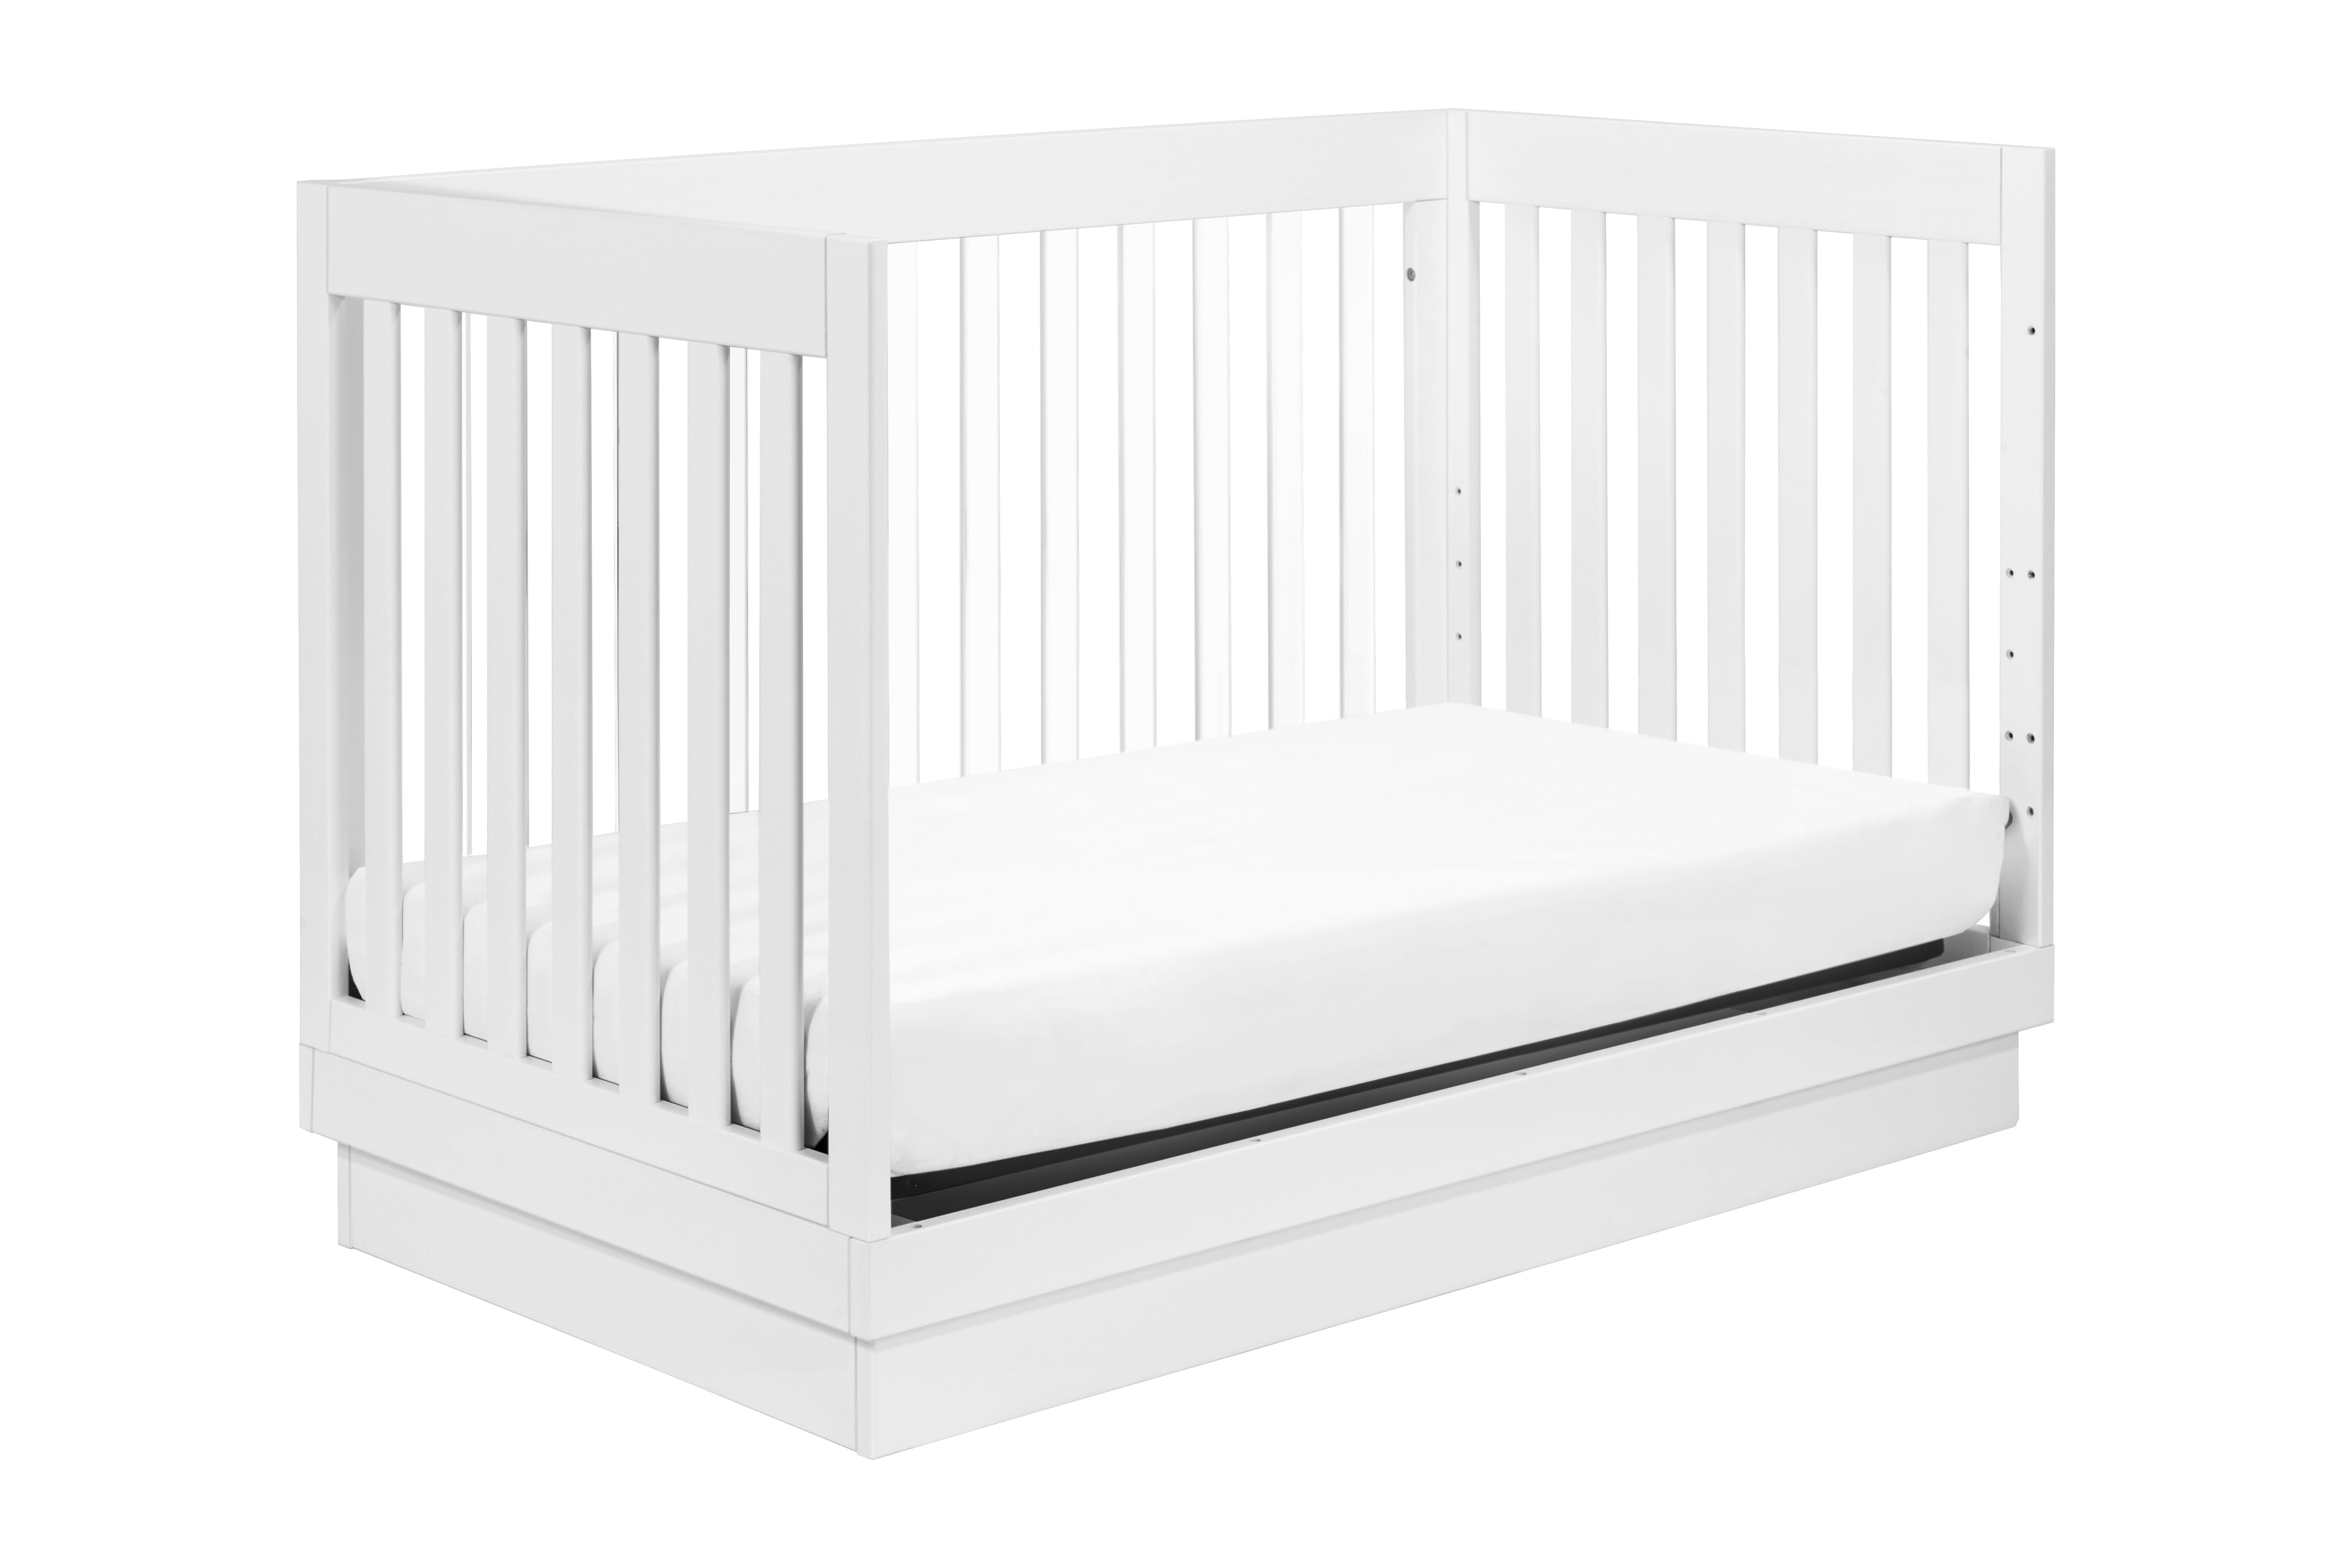 Harlow 3-in-1 Convertible Crib in White & Acrylic - Twinkle Twinkle Little One